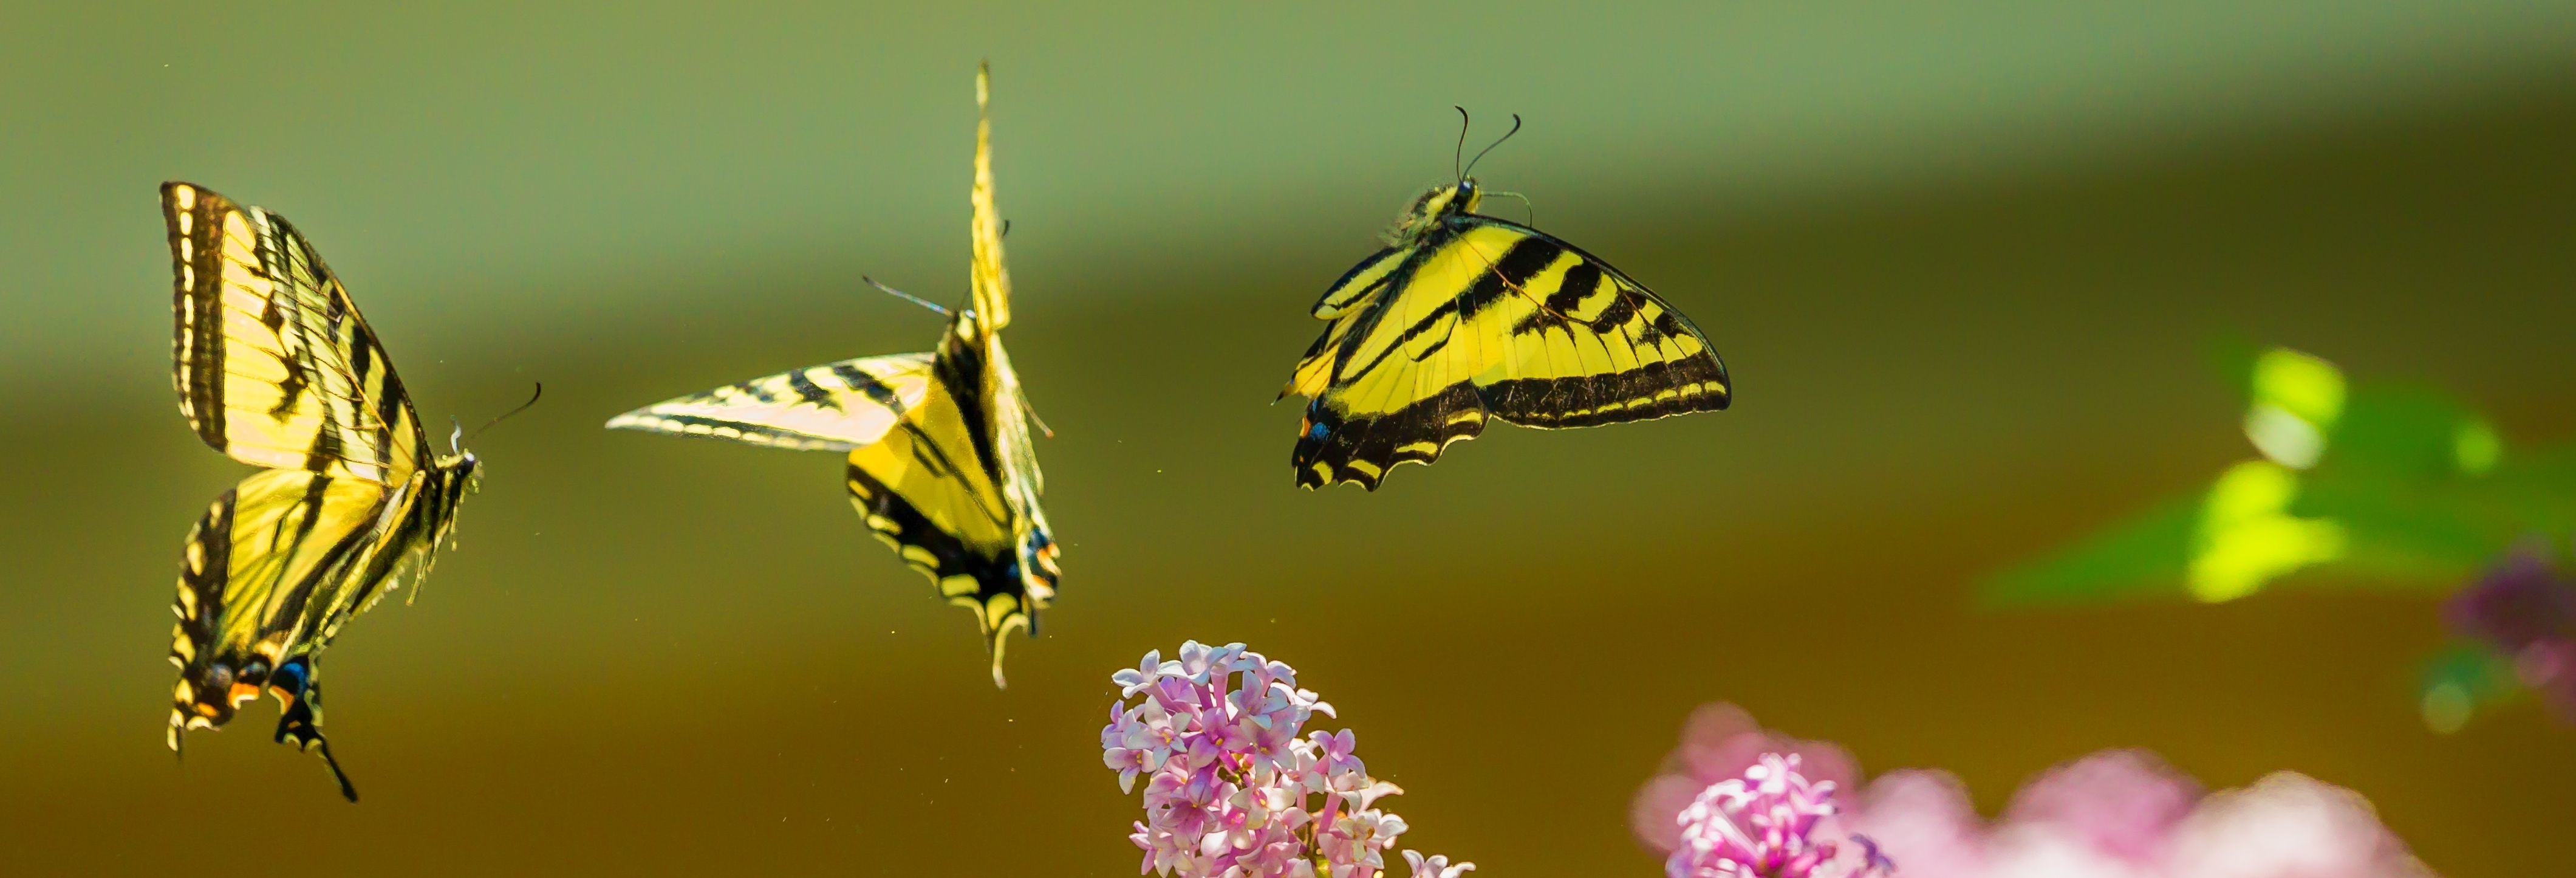 Yellow and black butterflies flying above pink flowers